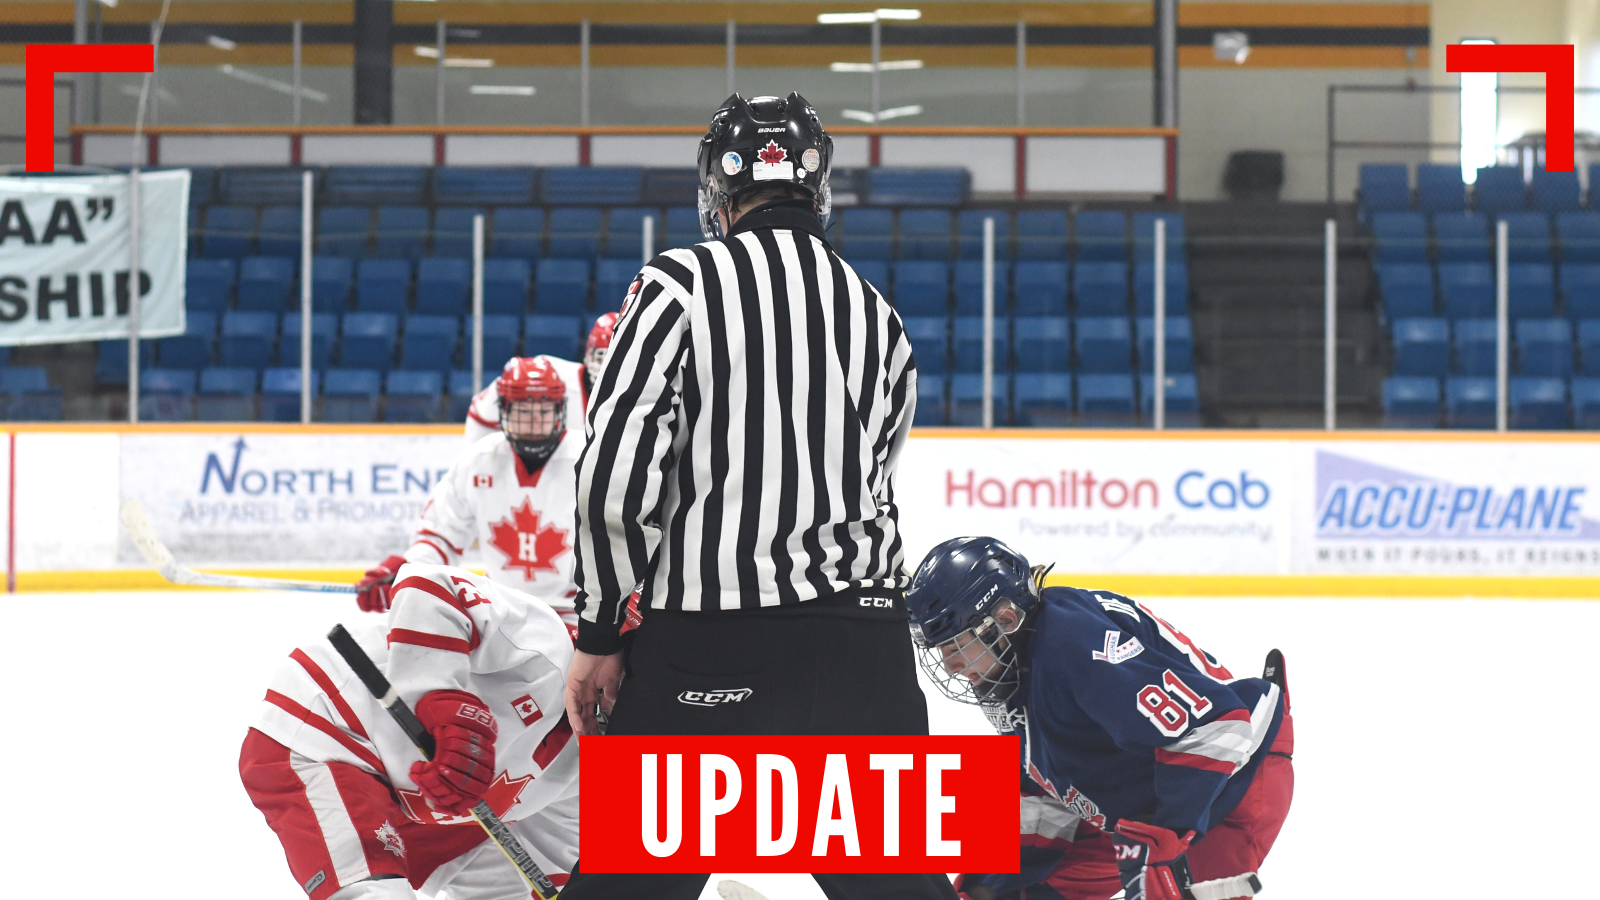 The Ontario Hockey Federation is pleased to announce a return to playing hockey indoors (1)